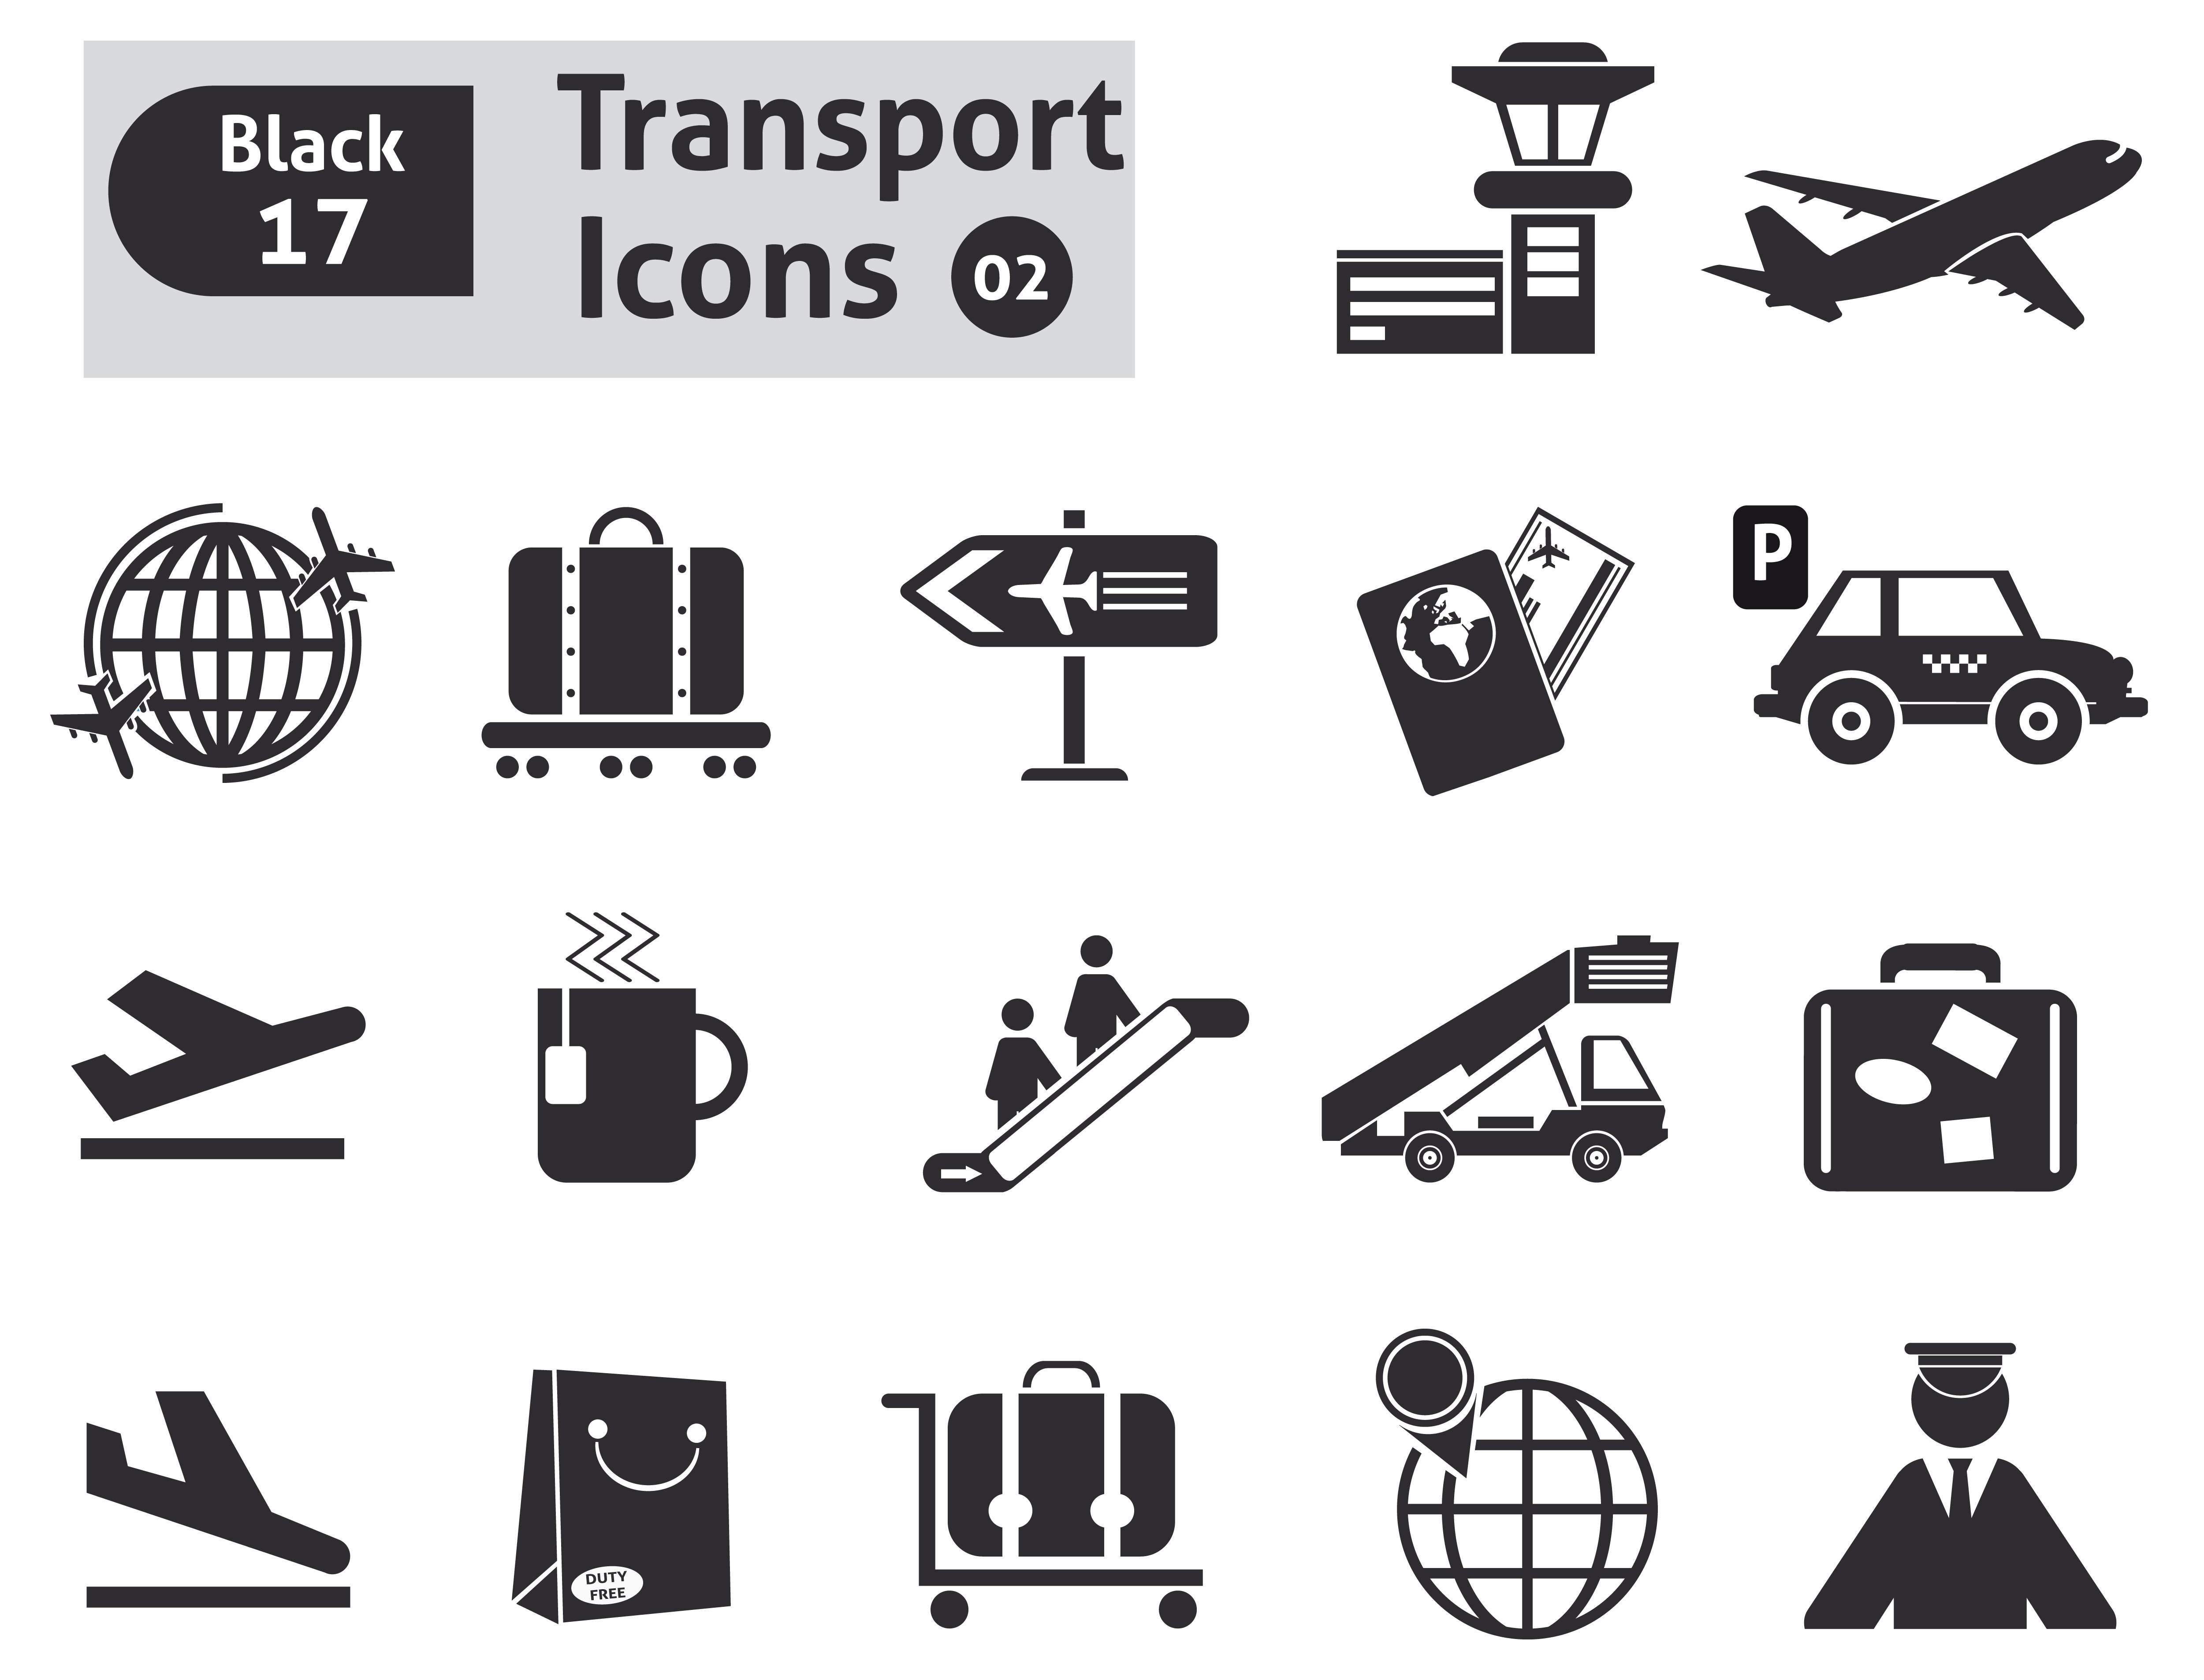 Transport icons preview image.